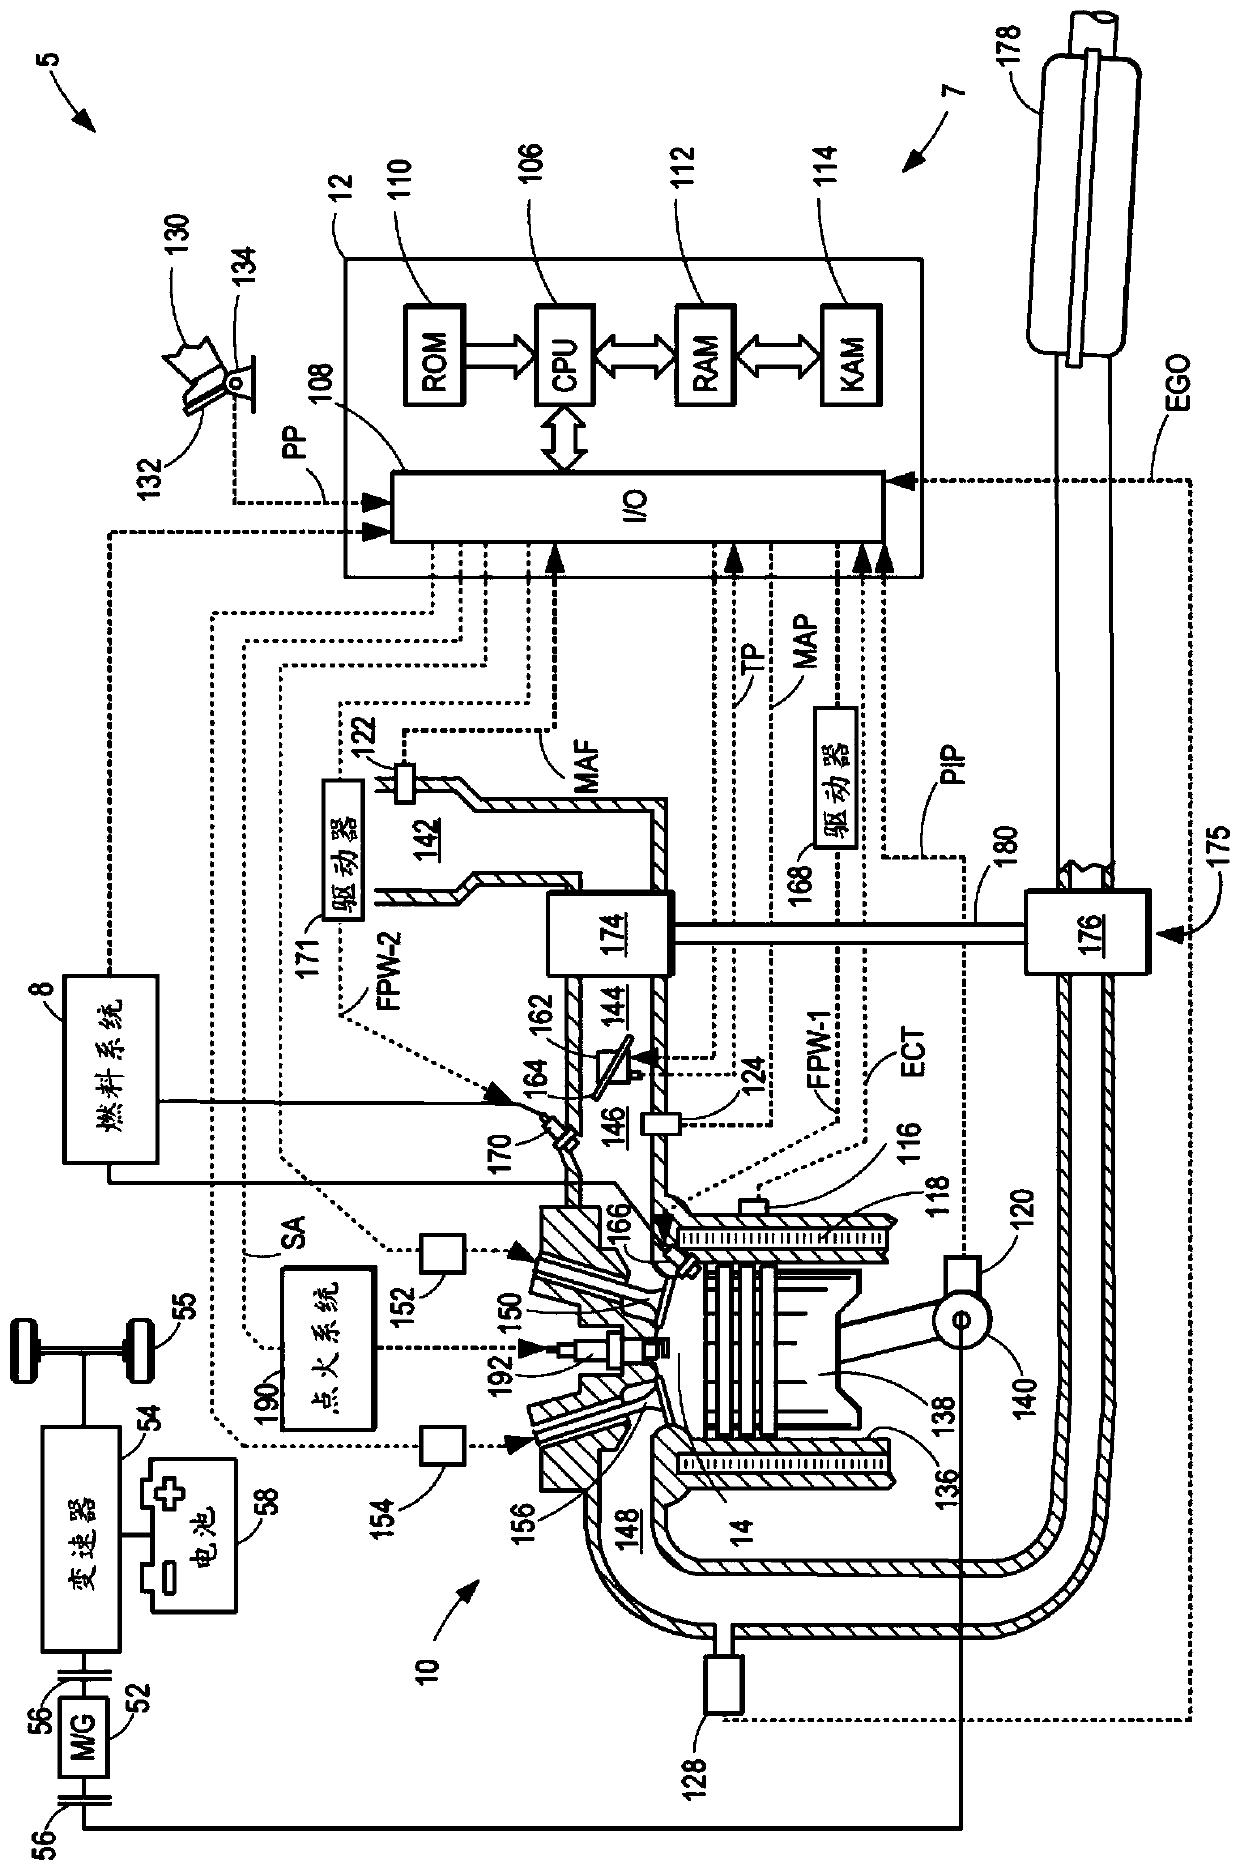 Methods and systems for electric turbocharger